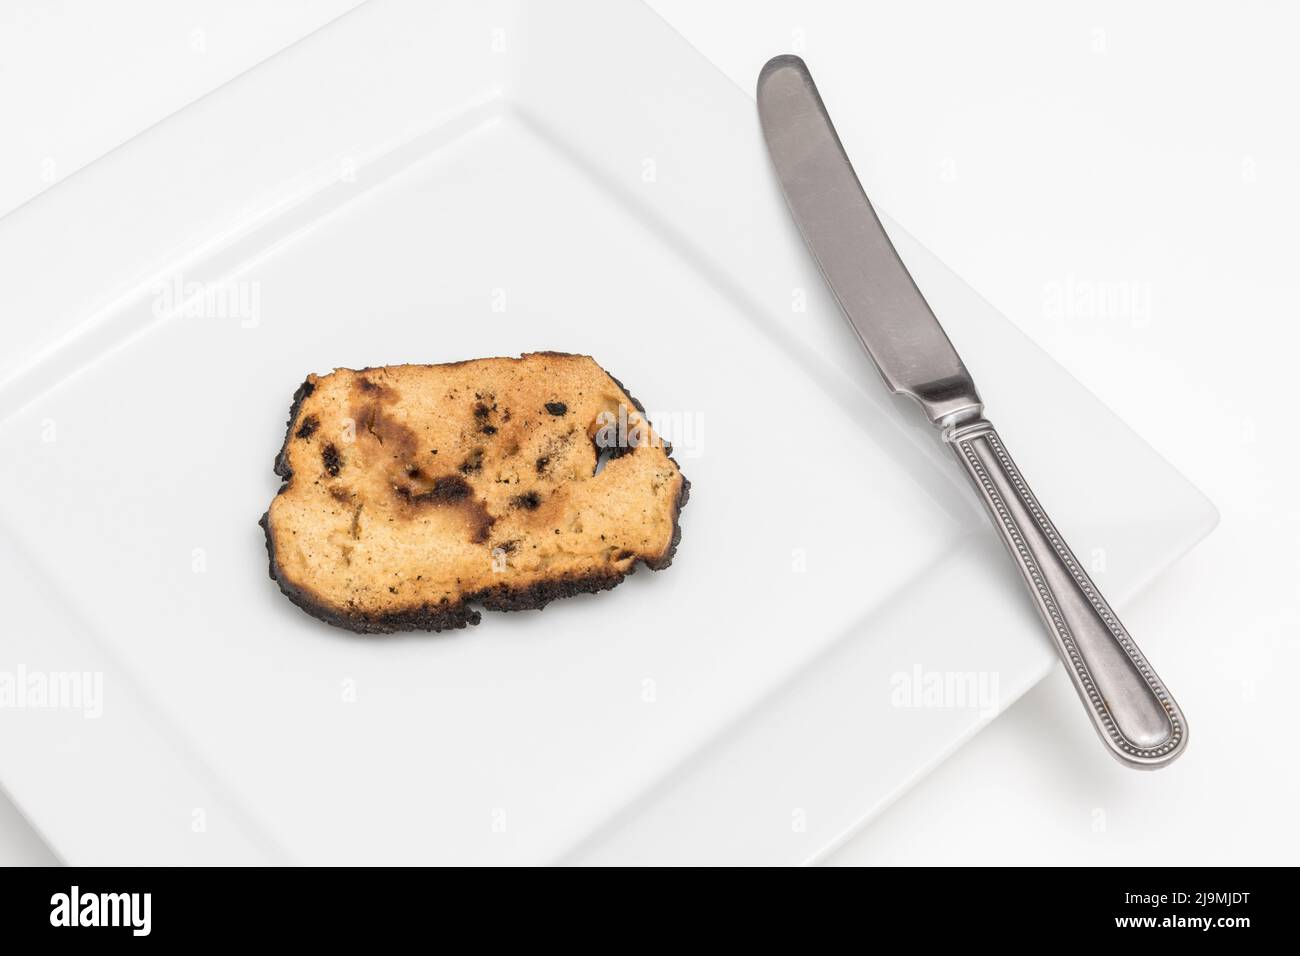 Bread which has been overcooked and burnt to a cinder on one side. For acrylamide and cancer, food unfit to eat, poor kitchen skills, unable to cook. Stock Photo